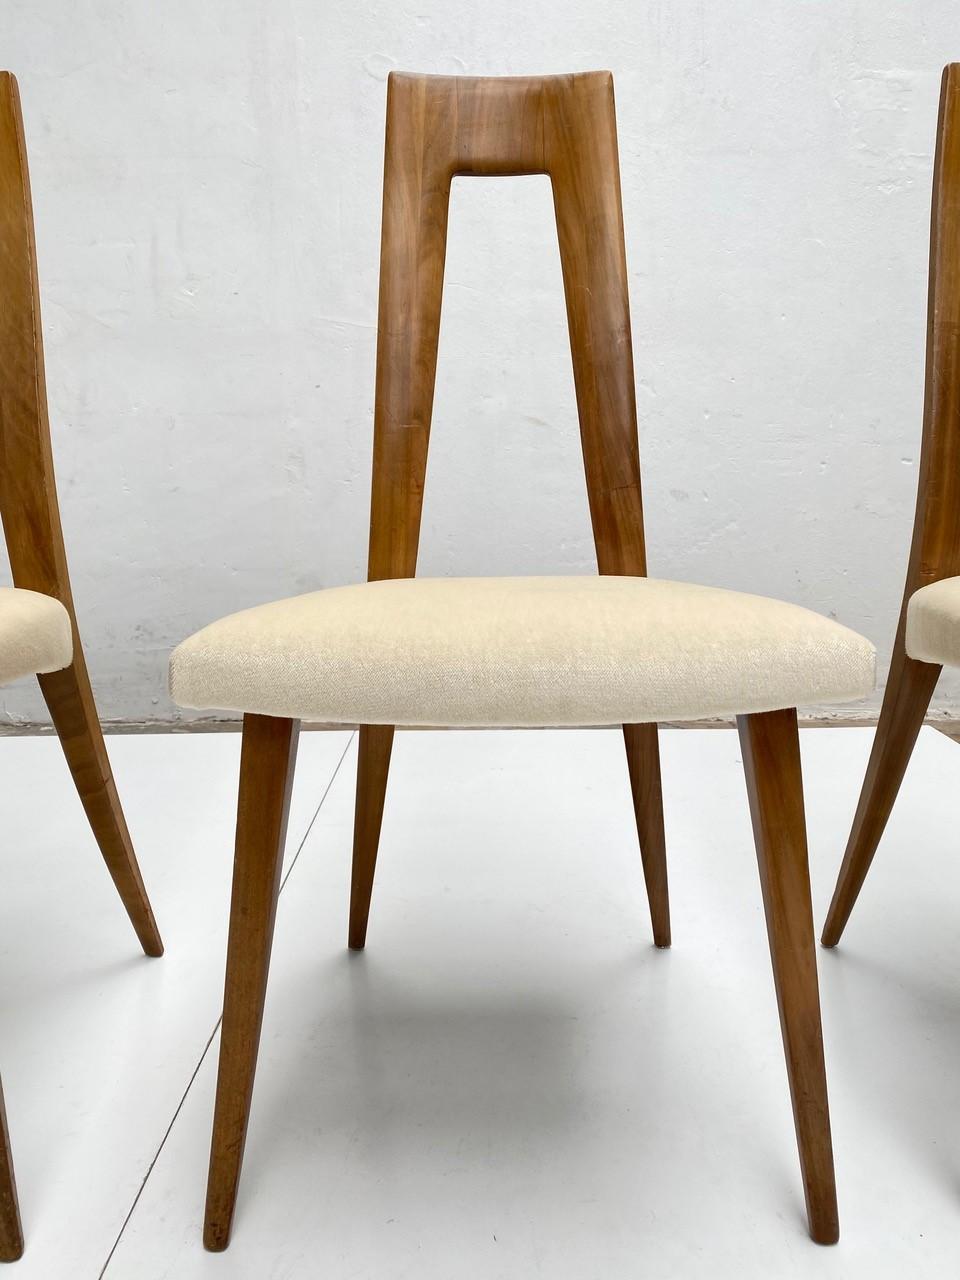 Six Sculptural Form 'Turin School' Walnut & Mohair Dining Chairs, Italy, 1940's 2